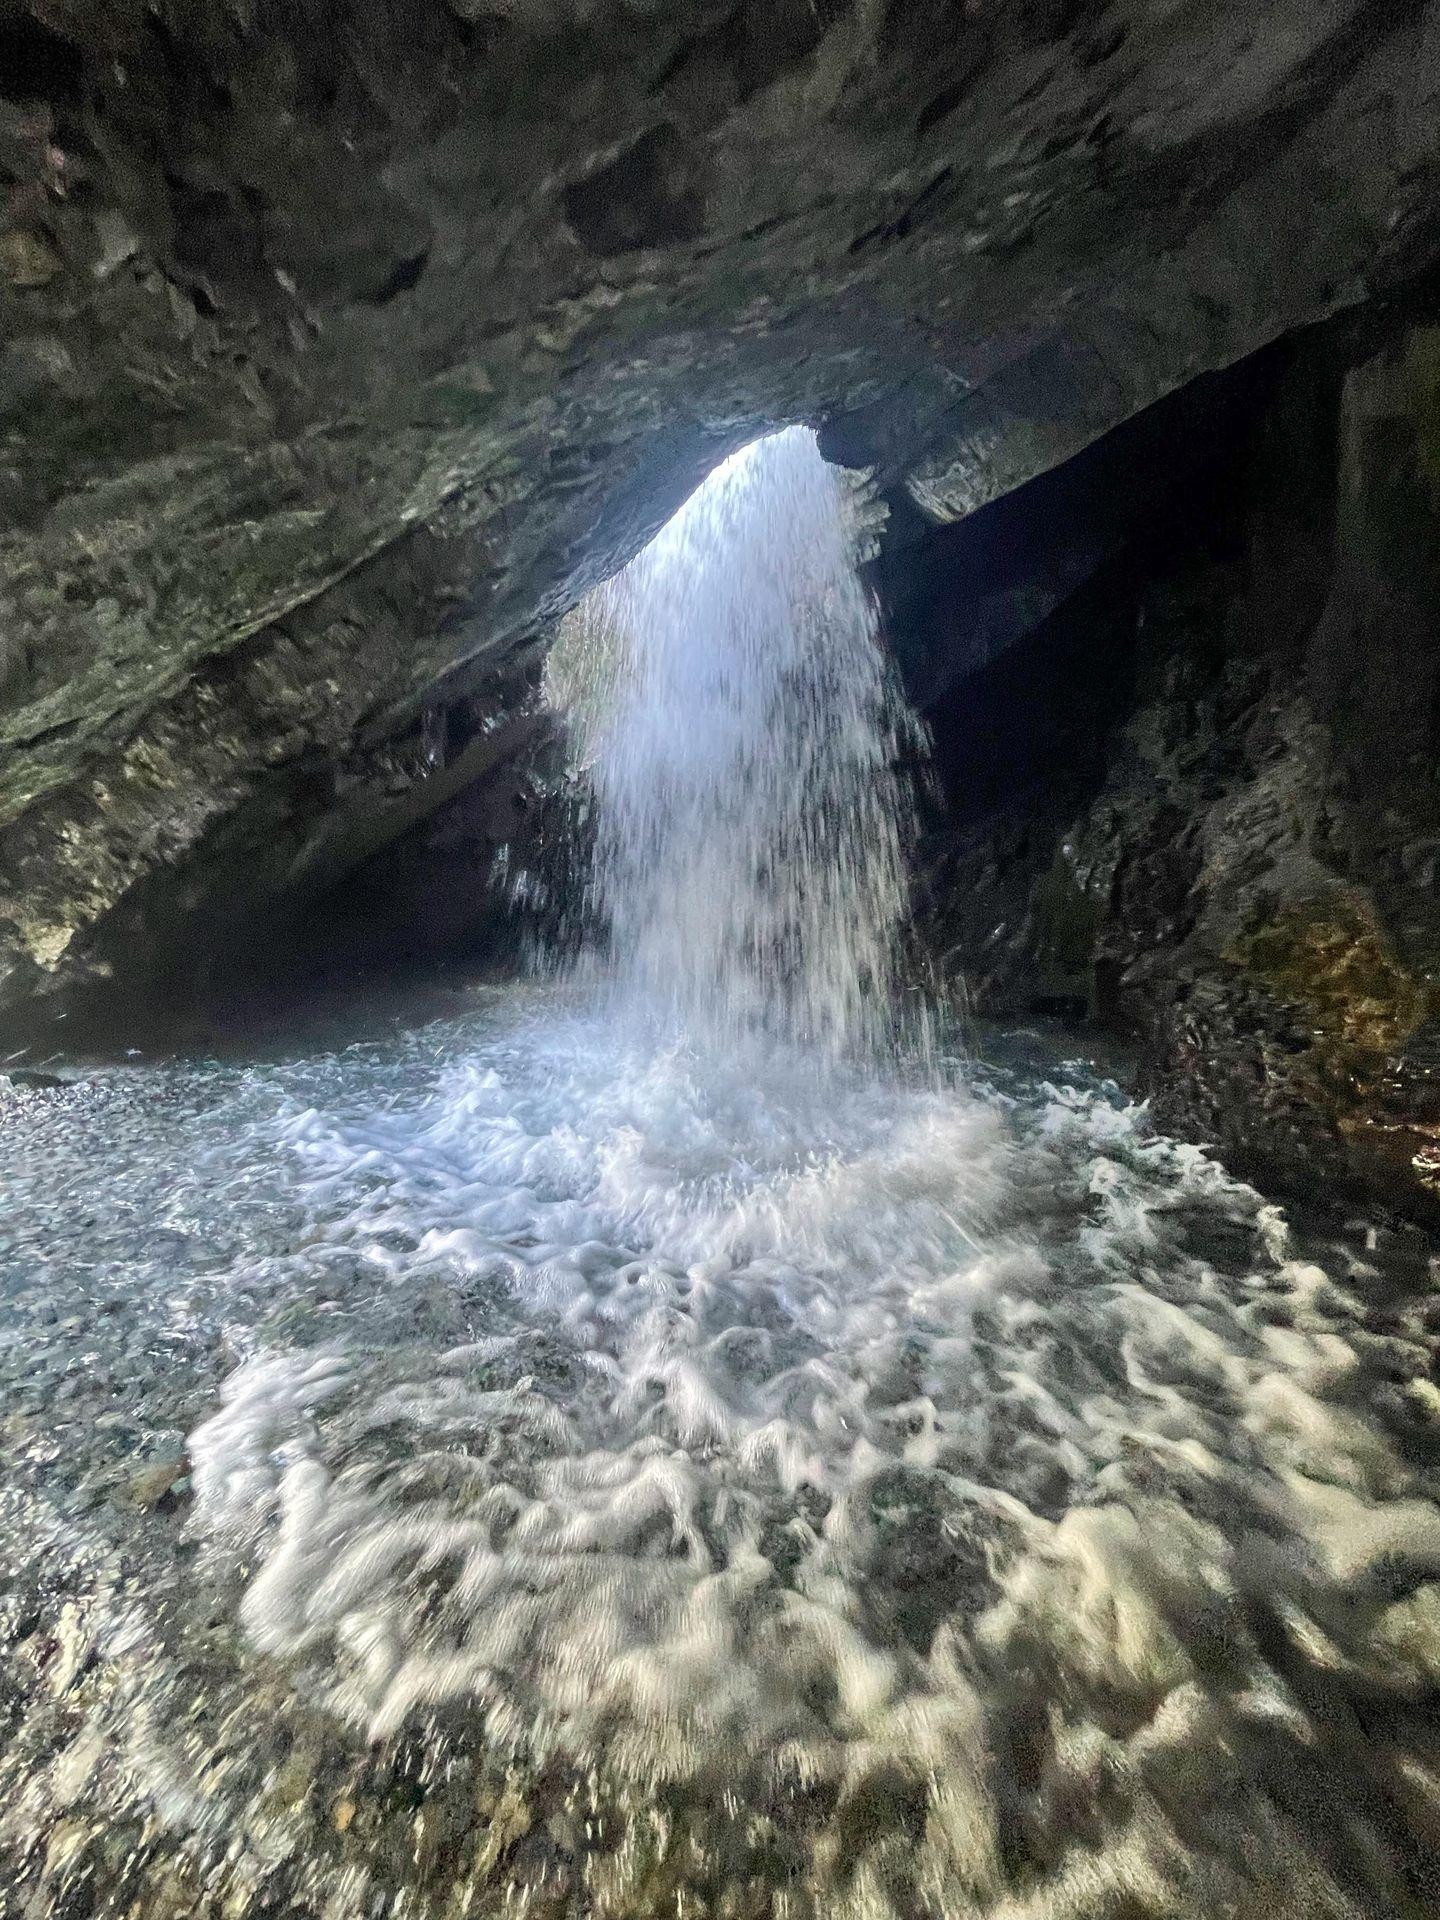 A heavy stream of water flowing through the hole, seen from below.